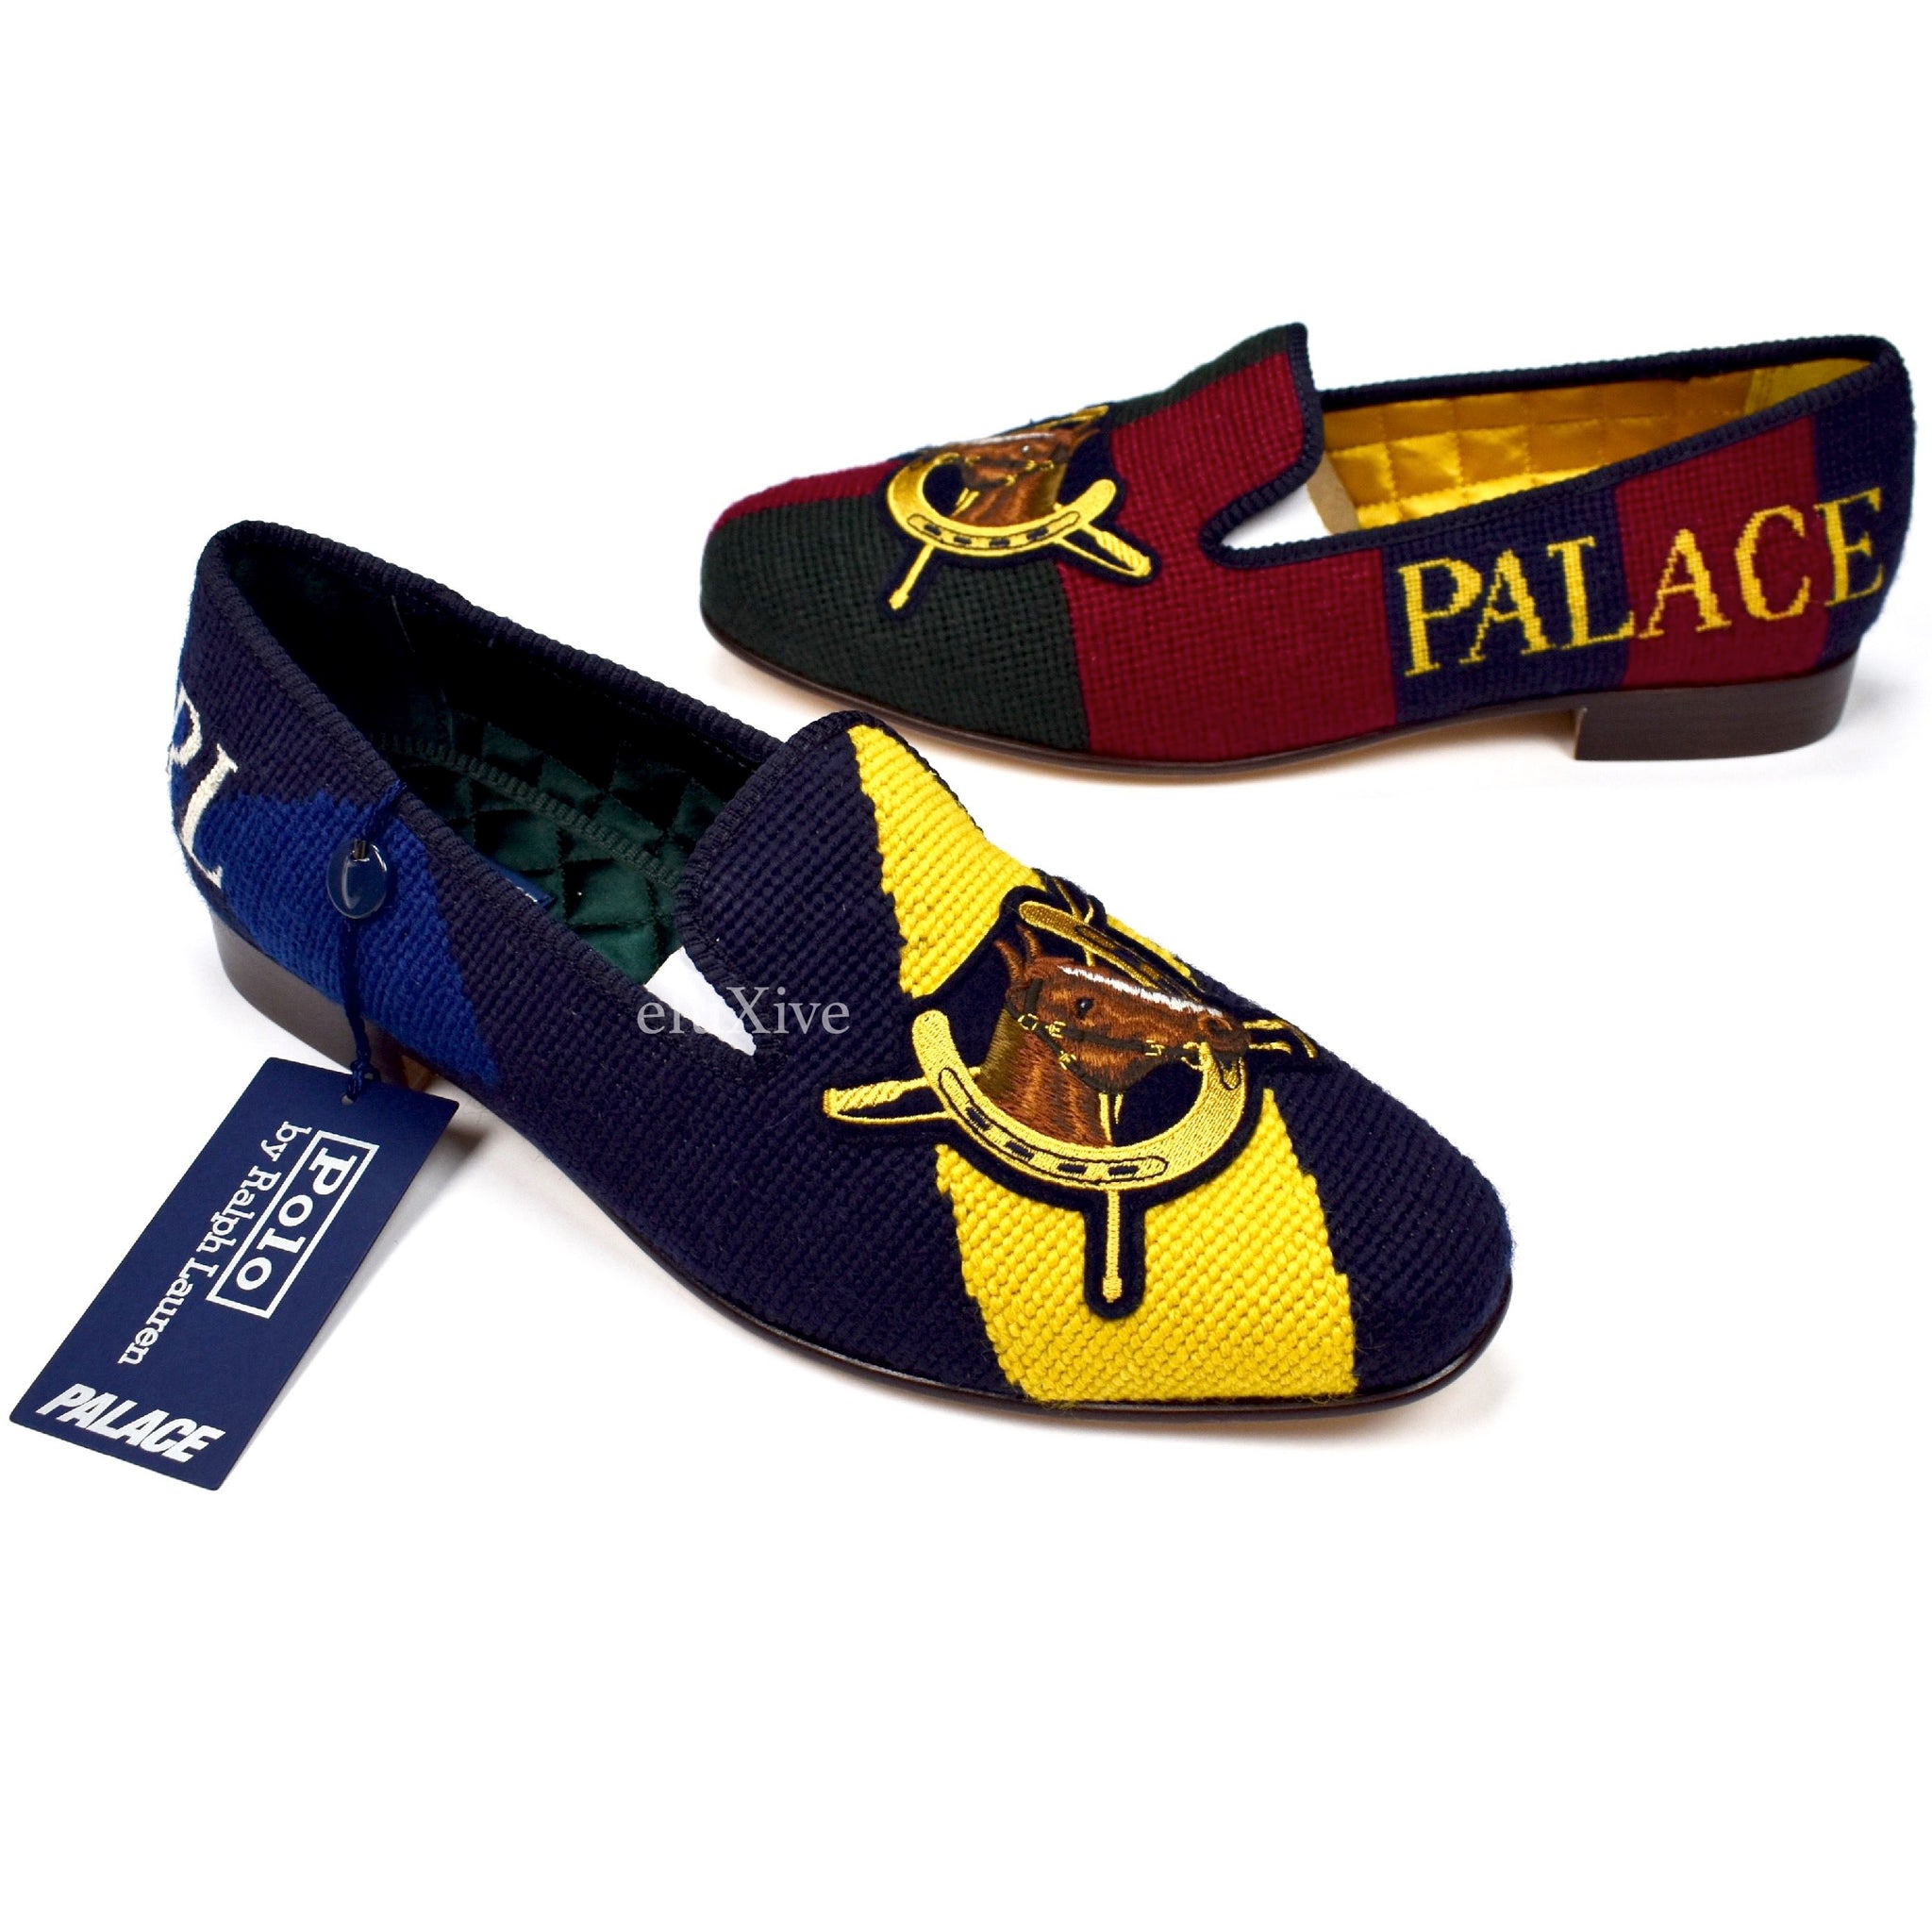 ralph lauren palace loafers